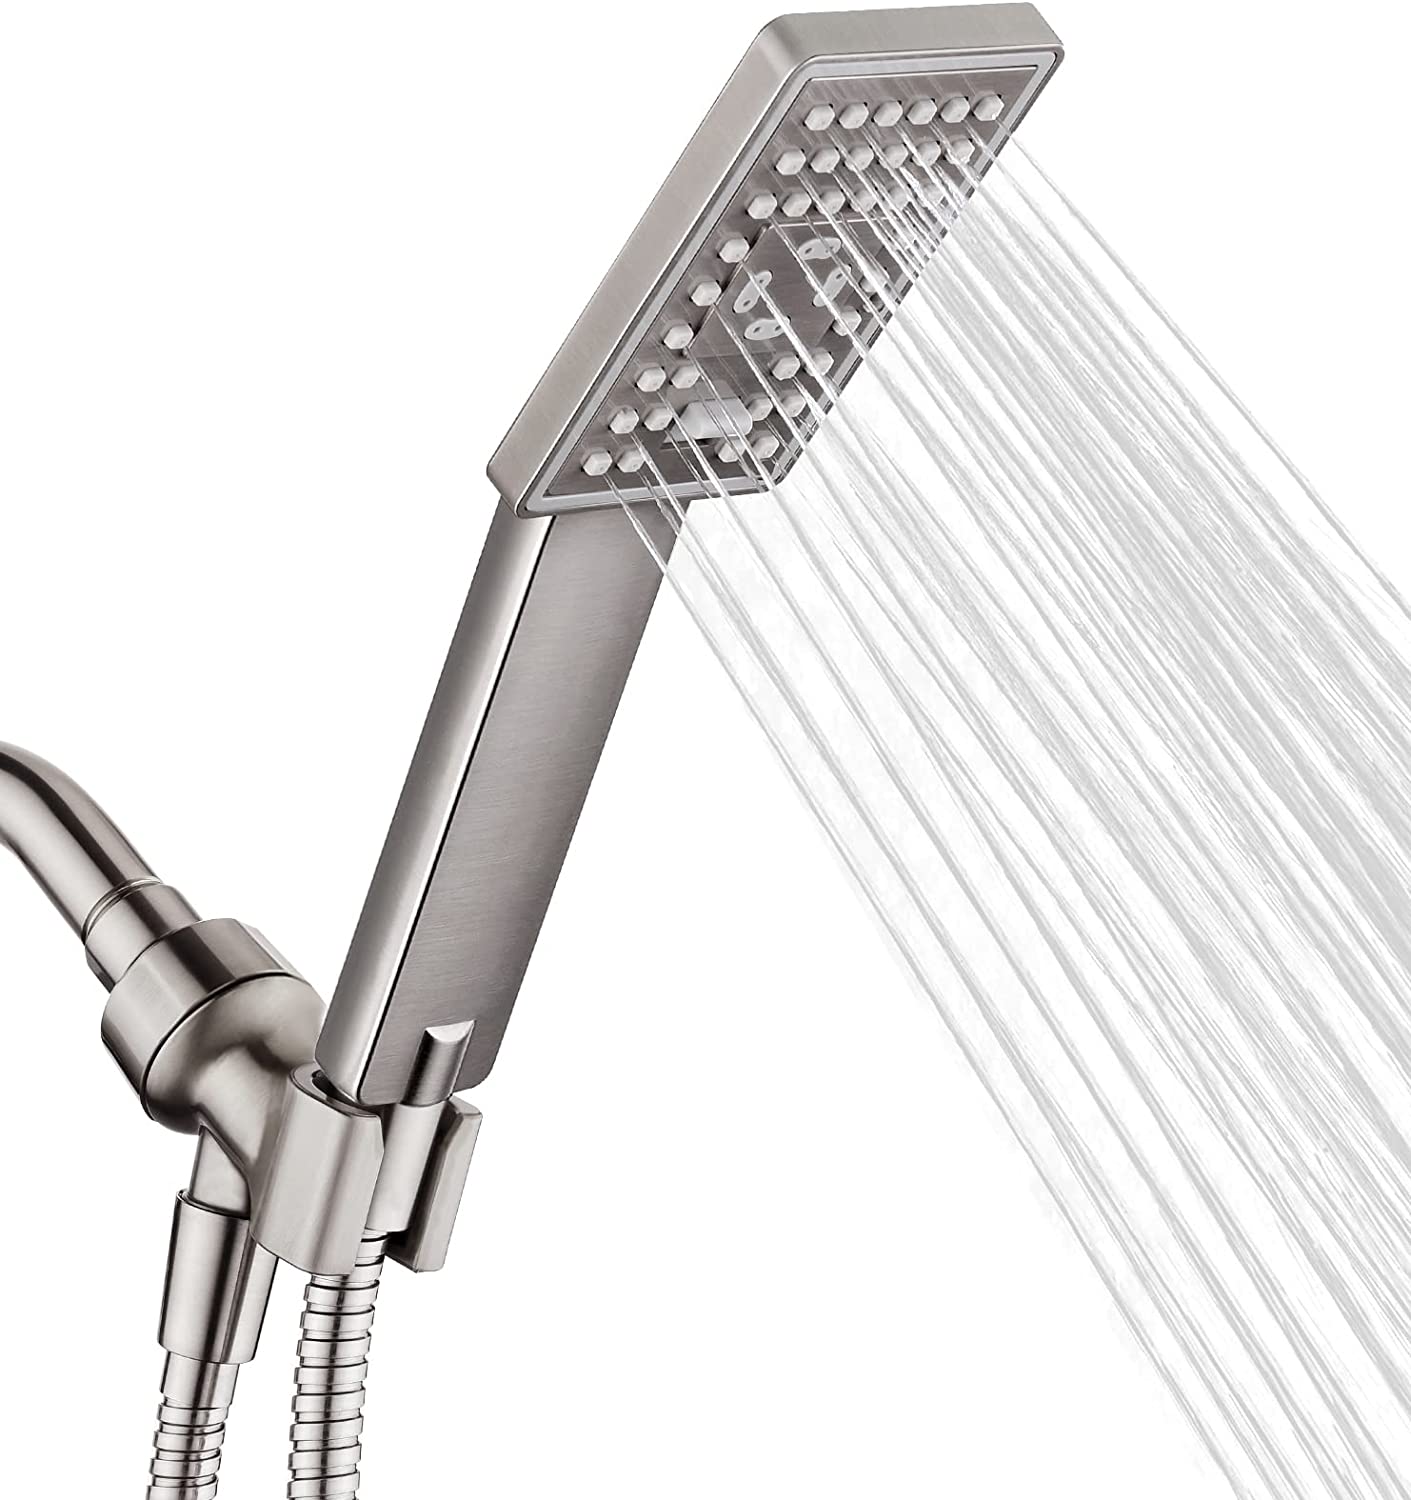 ALL METAL Handheld Shower Head with Hose and Brass Holder- CHROME - 2.5 GPM  High Pressure Shower Heads - Hand Shower Head with Adjustable Shower Wand  Bracket - …